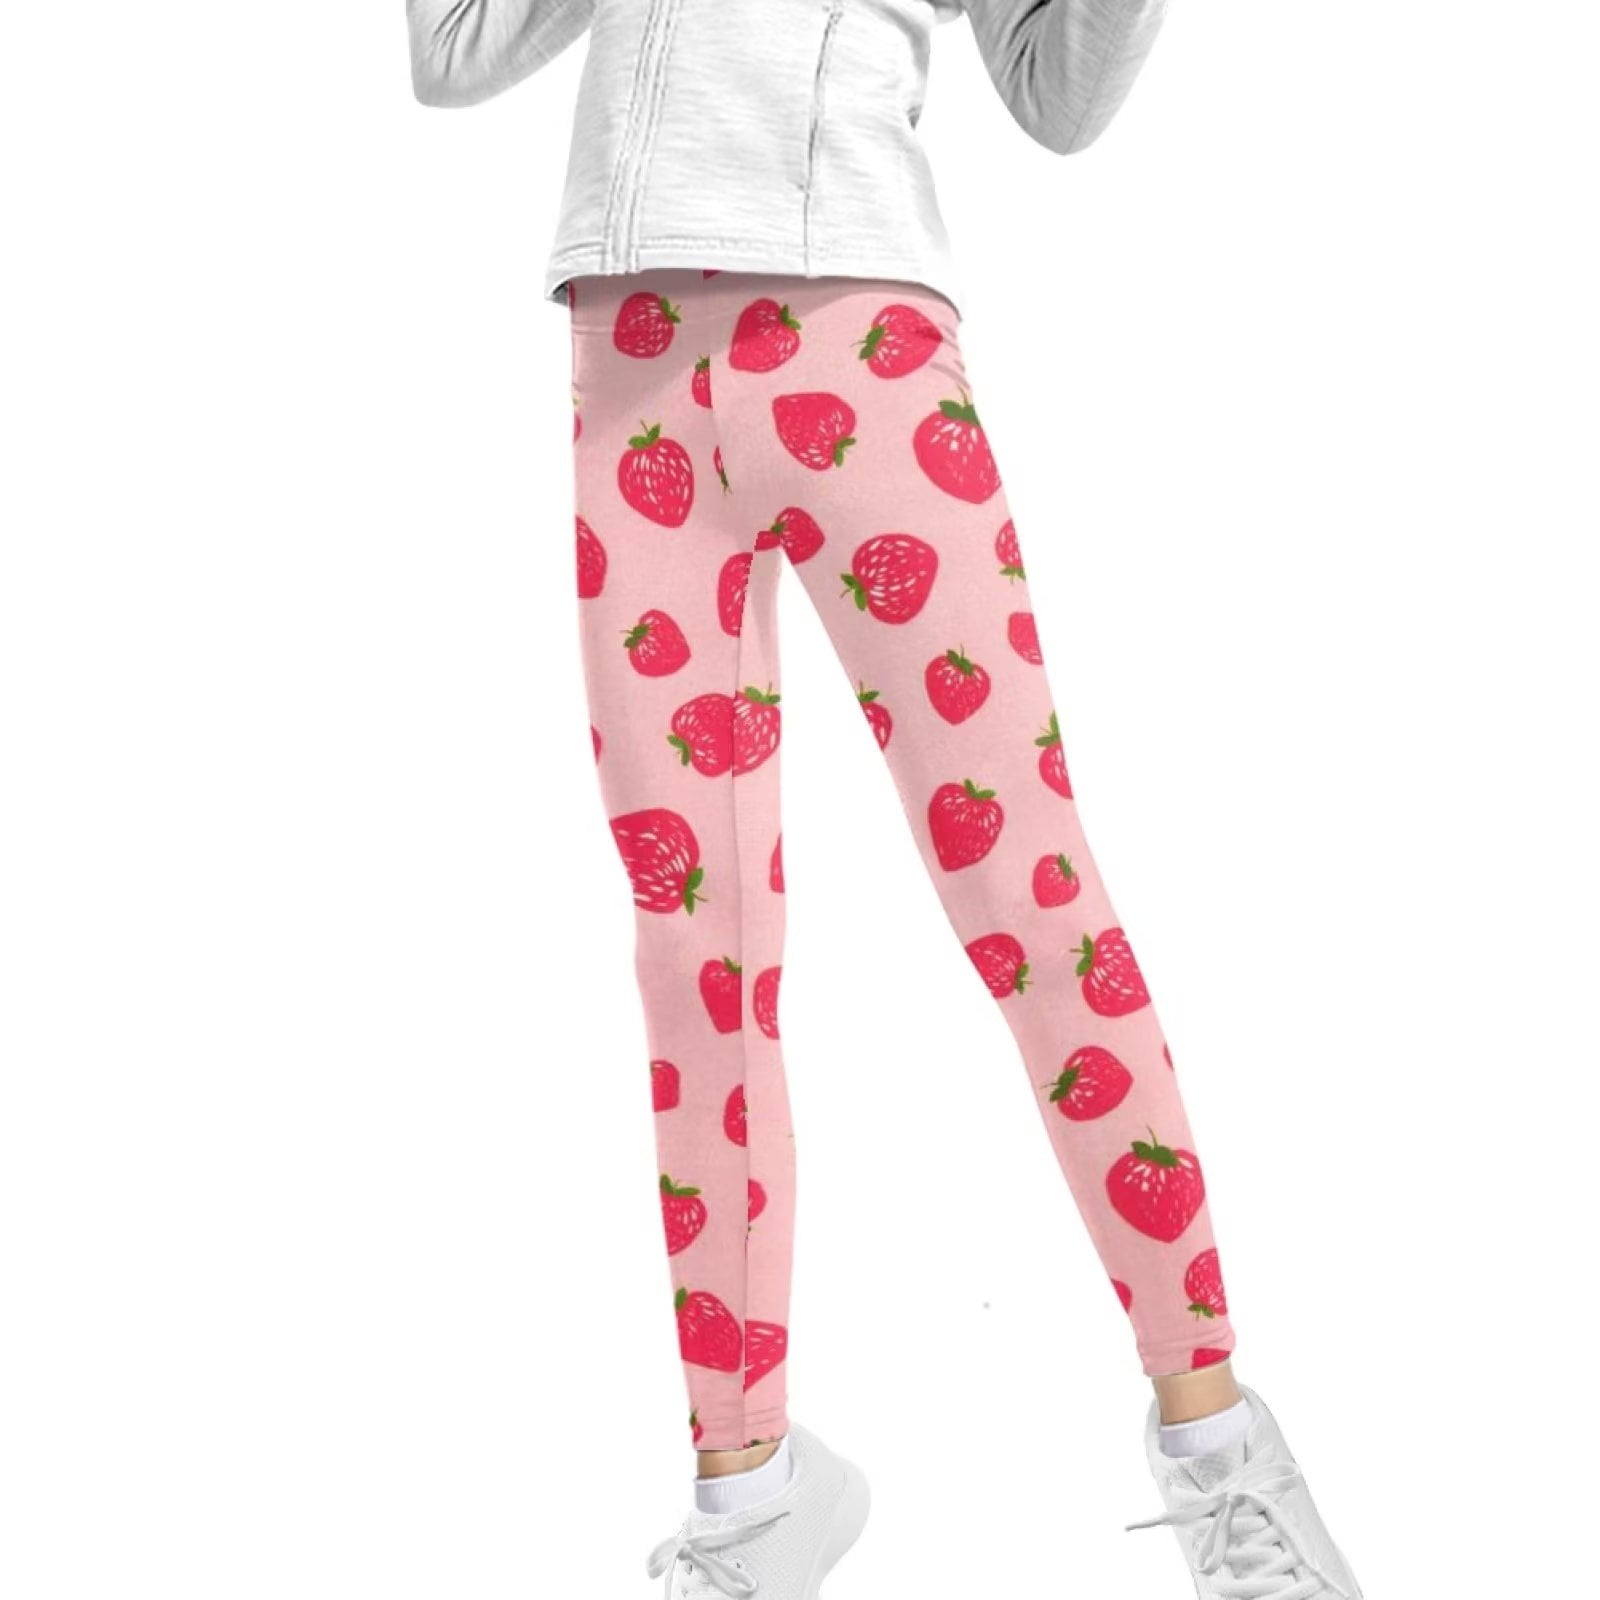 FKELYI Girls Leggings with Strawberry Size 8-9 Years Comfortable Playing Kids  Tights Pink Stretchy School Yoga Pants High Waisted Yummy Control 